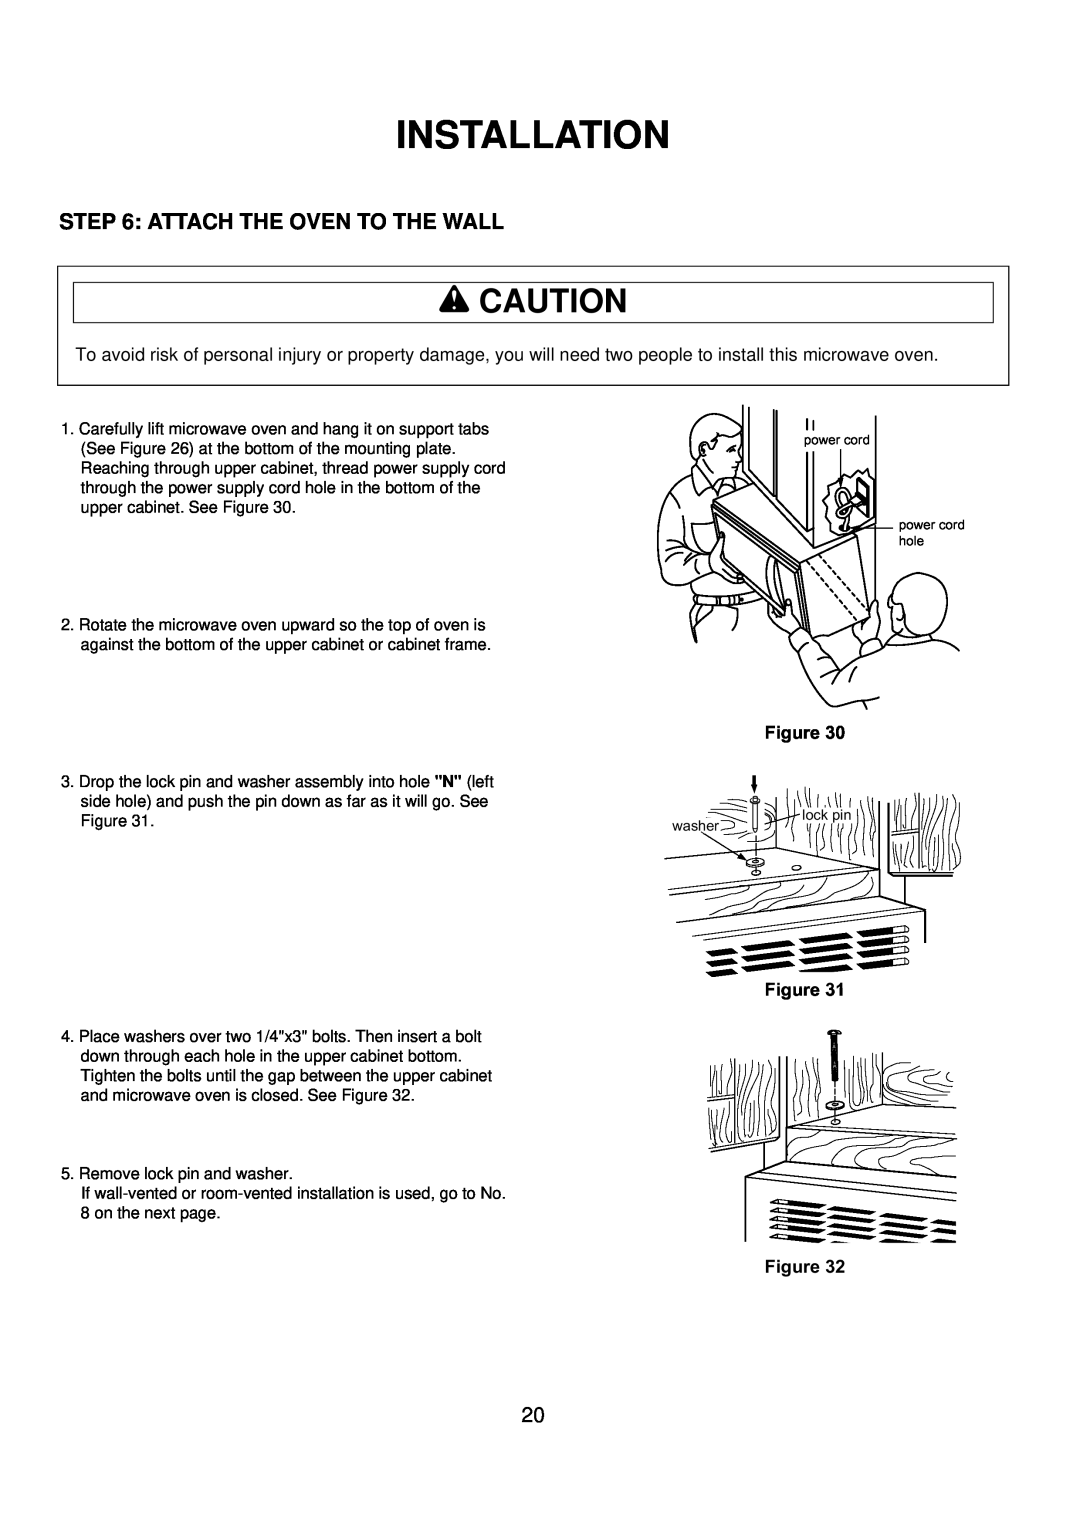 Amana ACO1520A important safety instructions Attach The Oven To The Wall, Installation, wCAUTION, Figure 